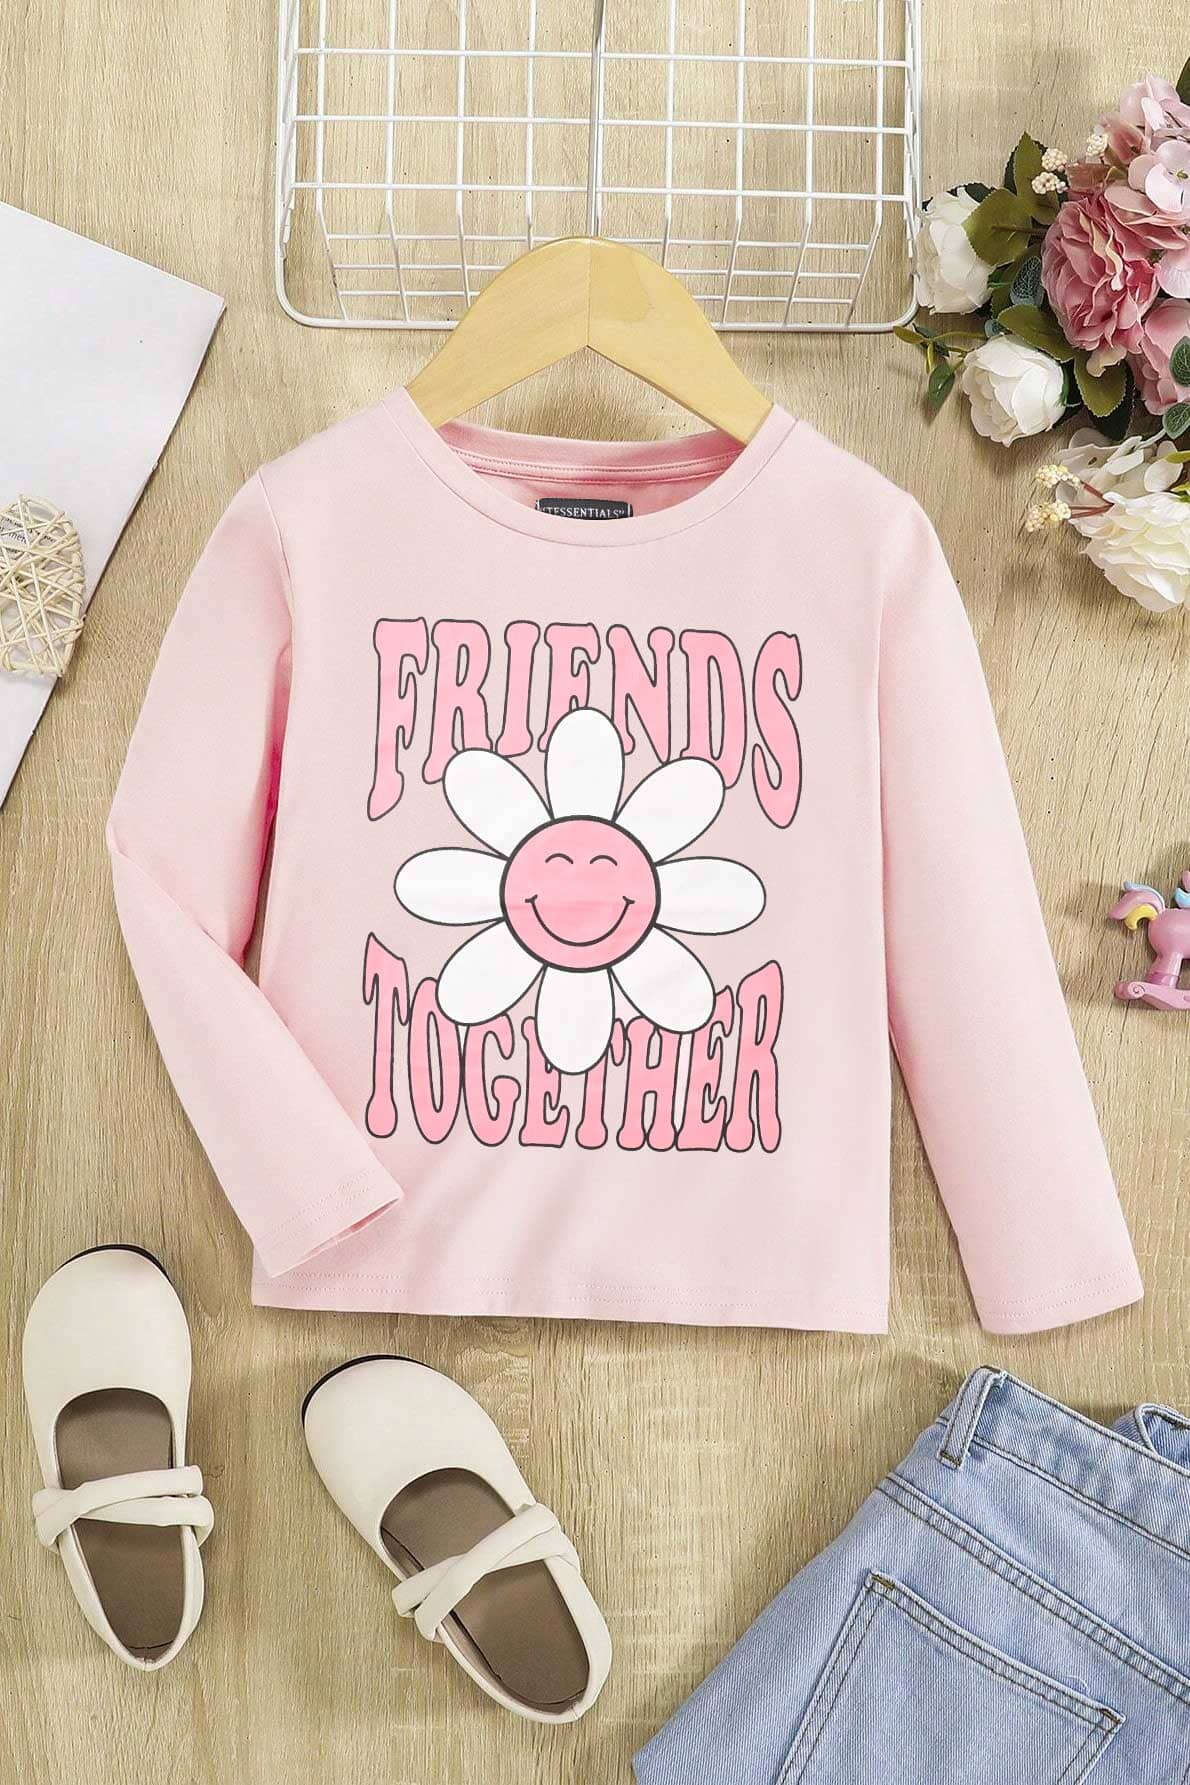 Tessentials Girl's Friends Together Printed Long Sleeve Tee Shirt Girl's Tee Shirt SNR 